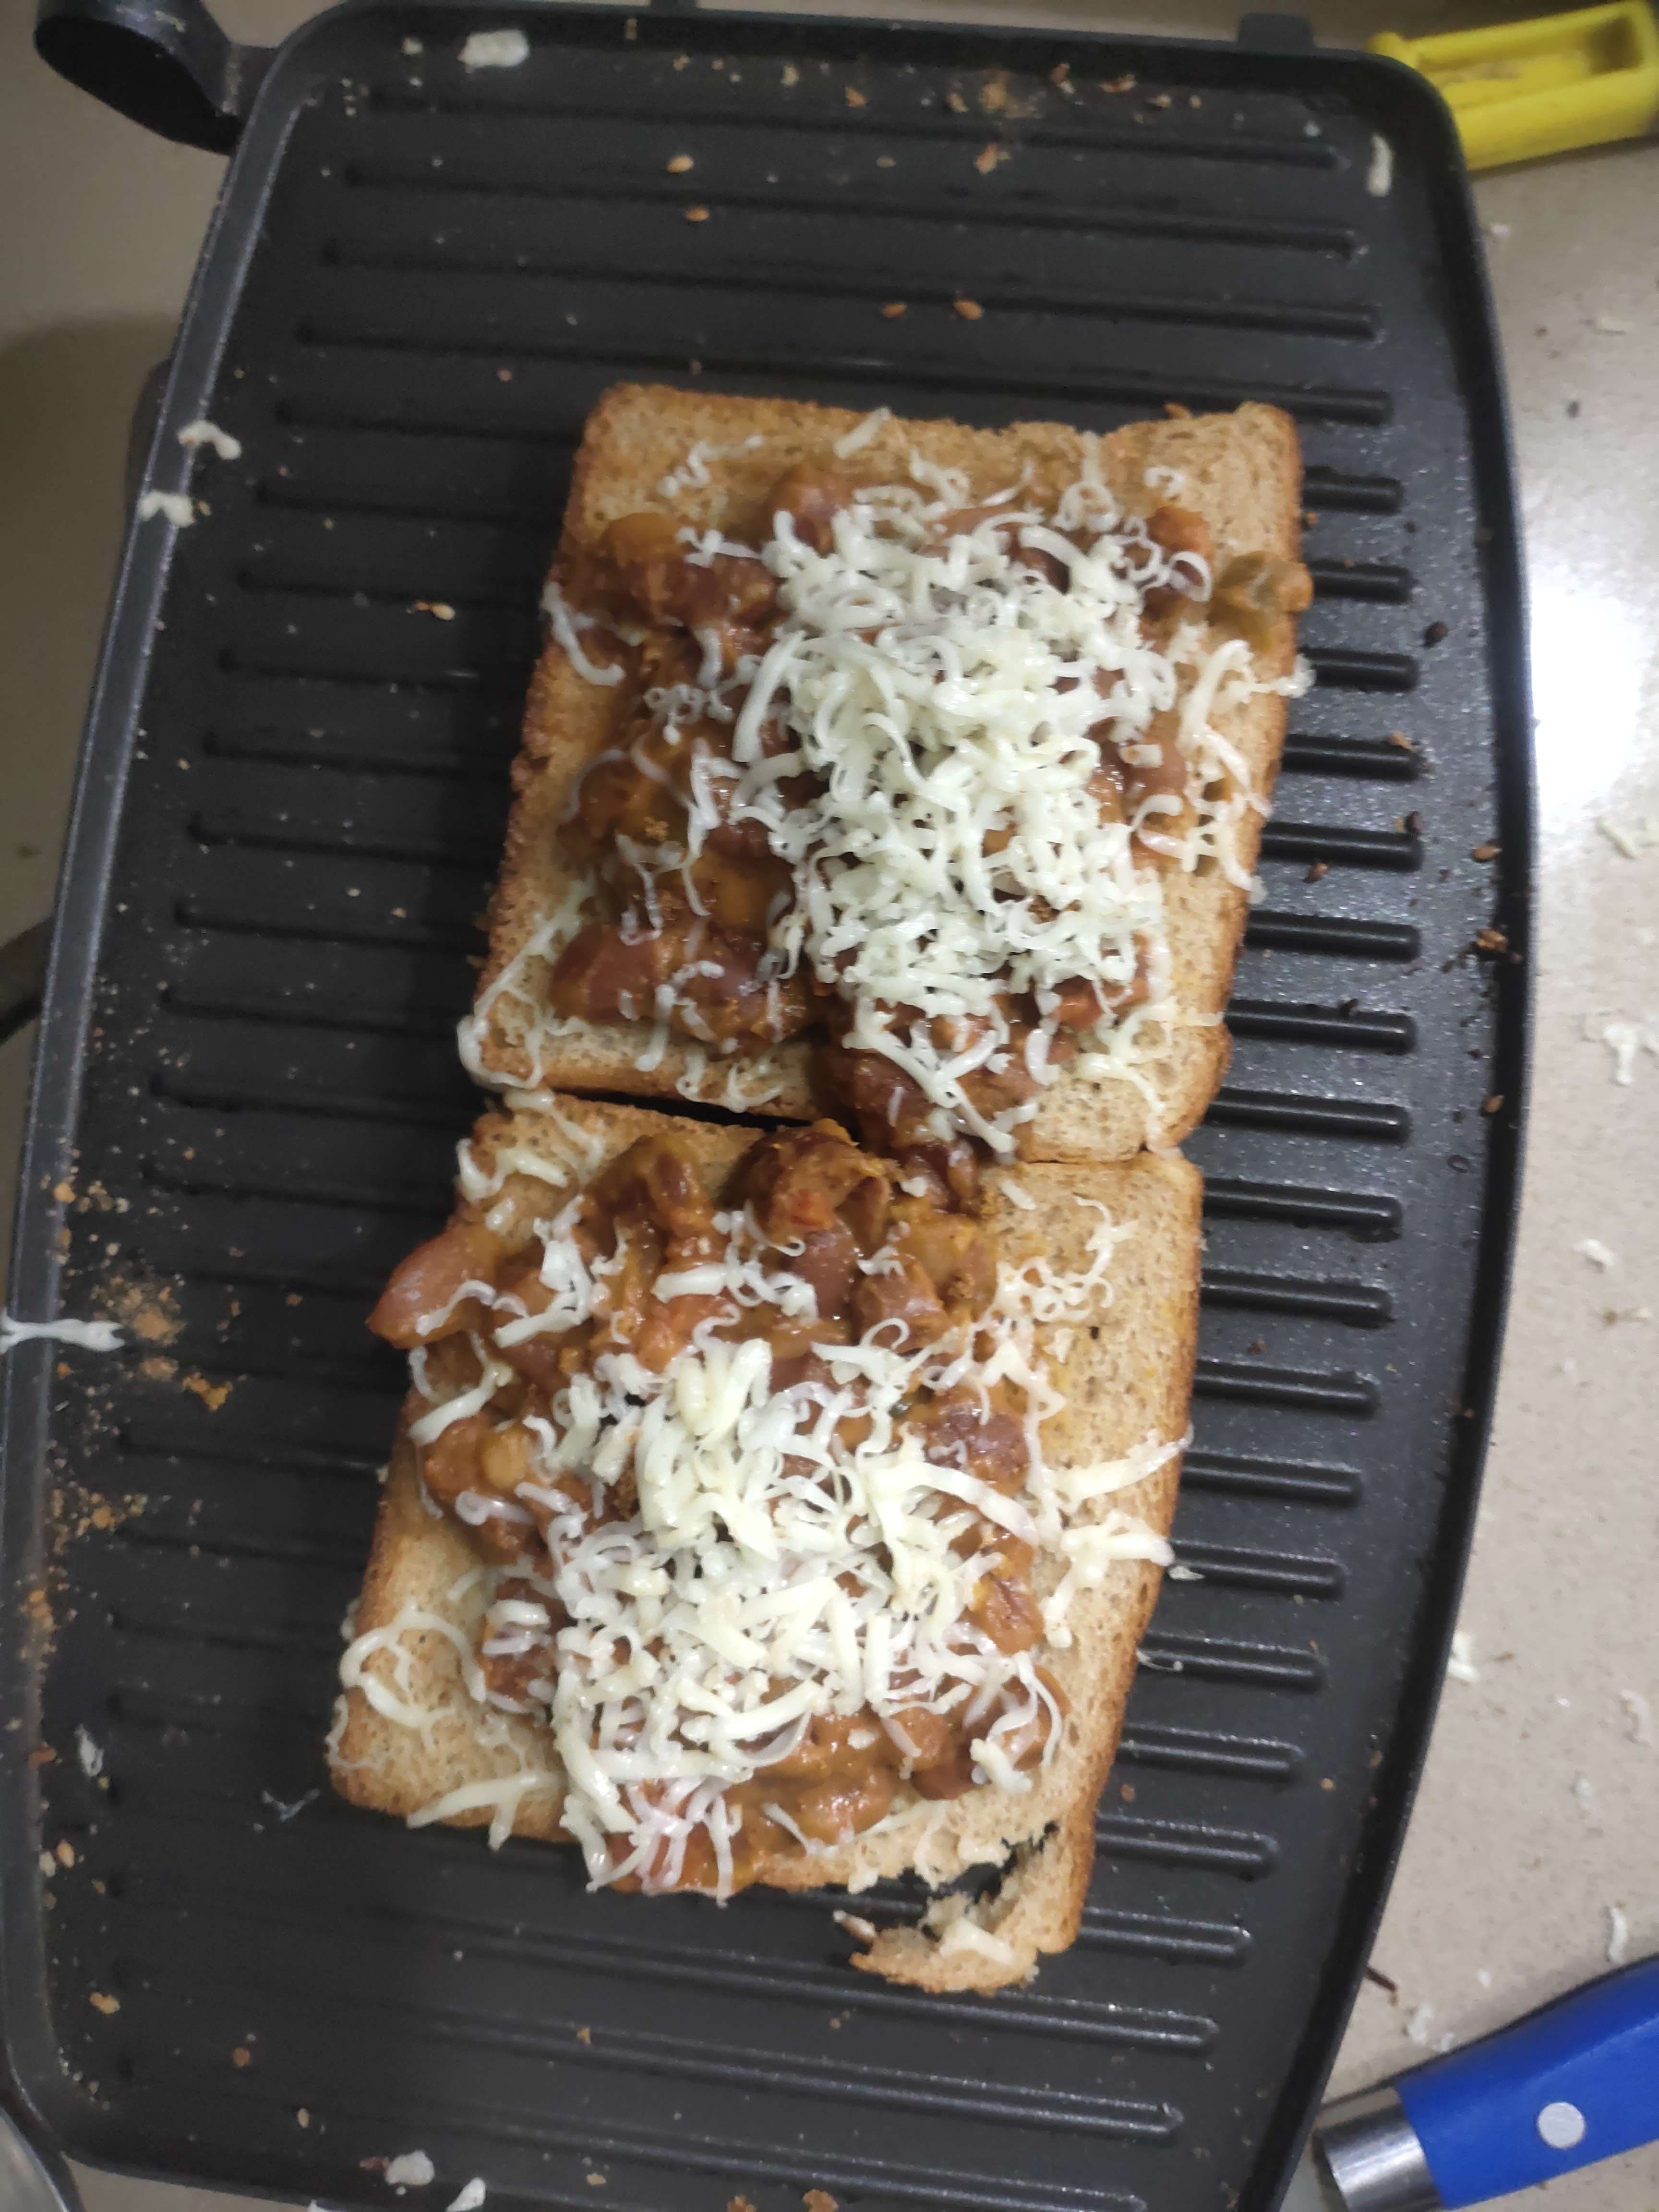 Tasty Baked Beans on Toast  cooked by COOX chefs cooks during occasions parties events at home